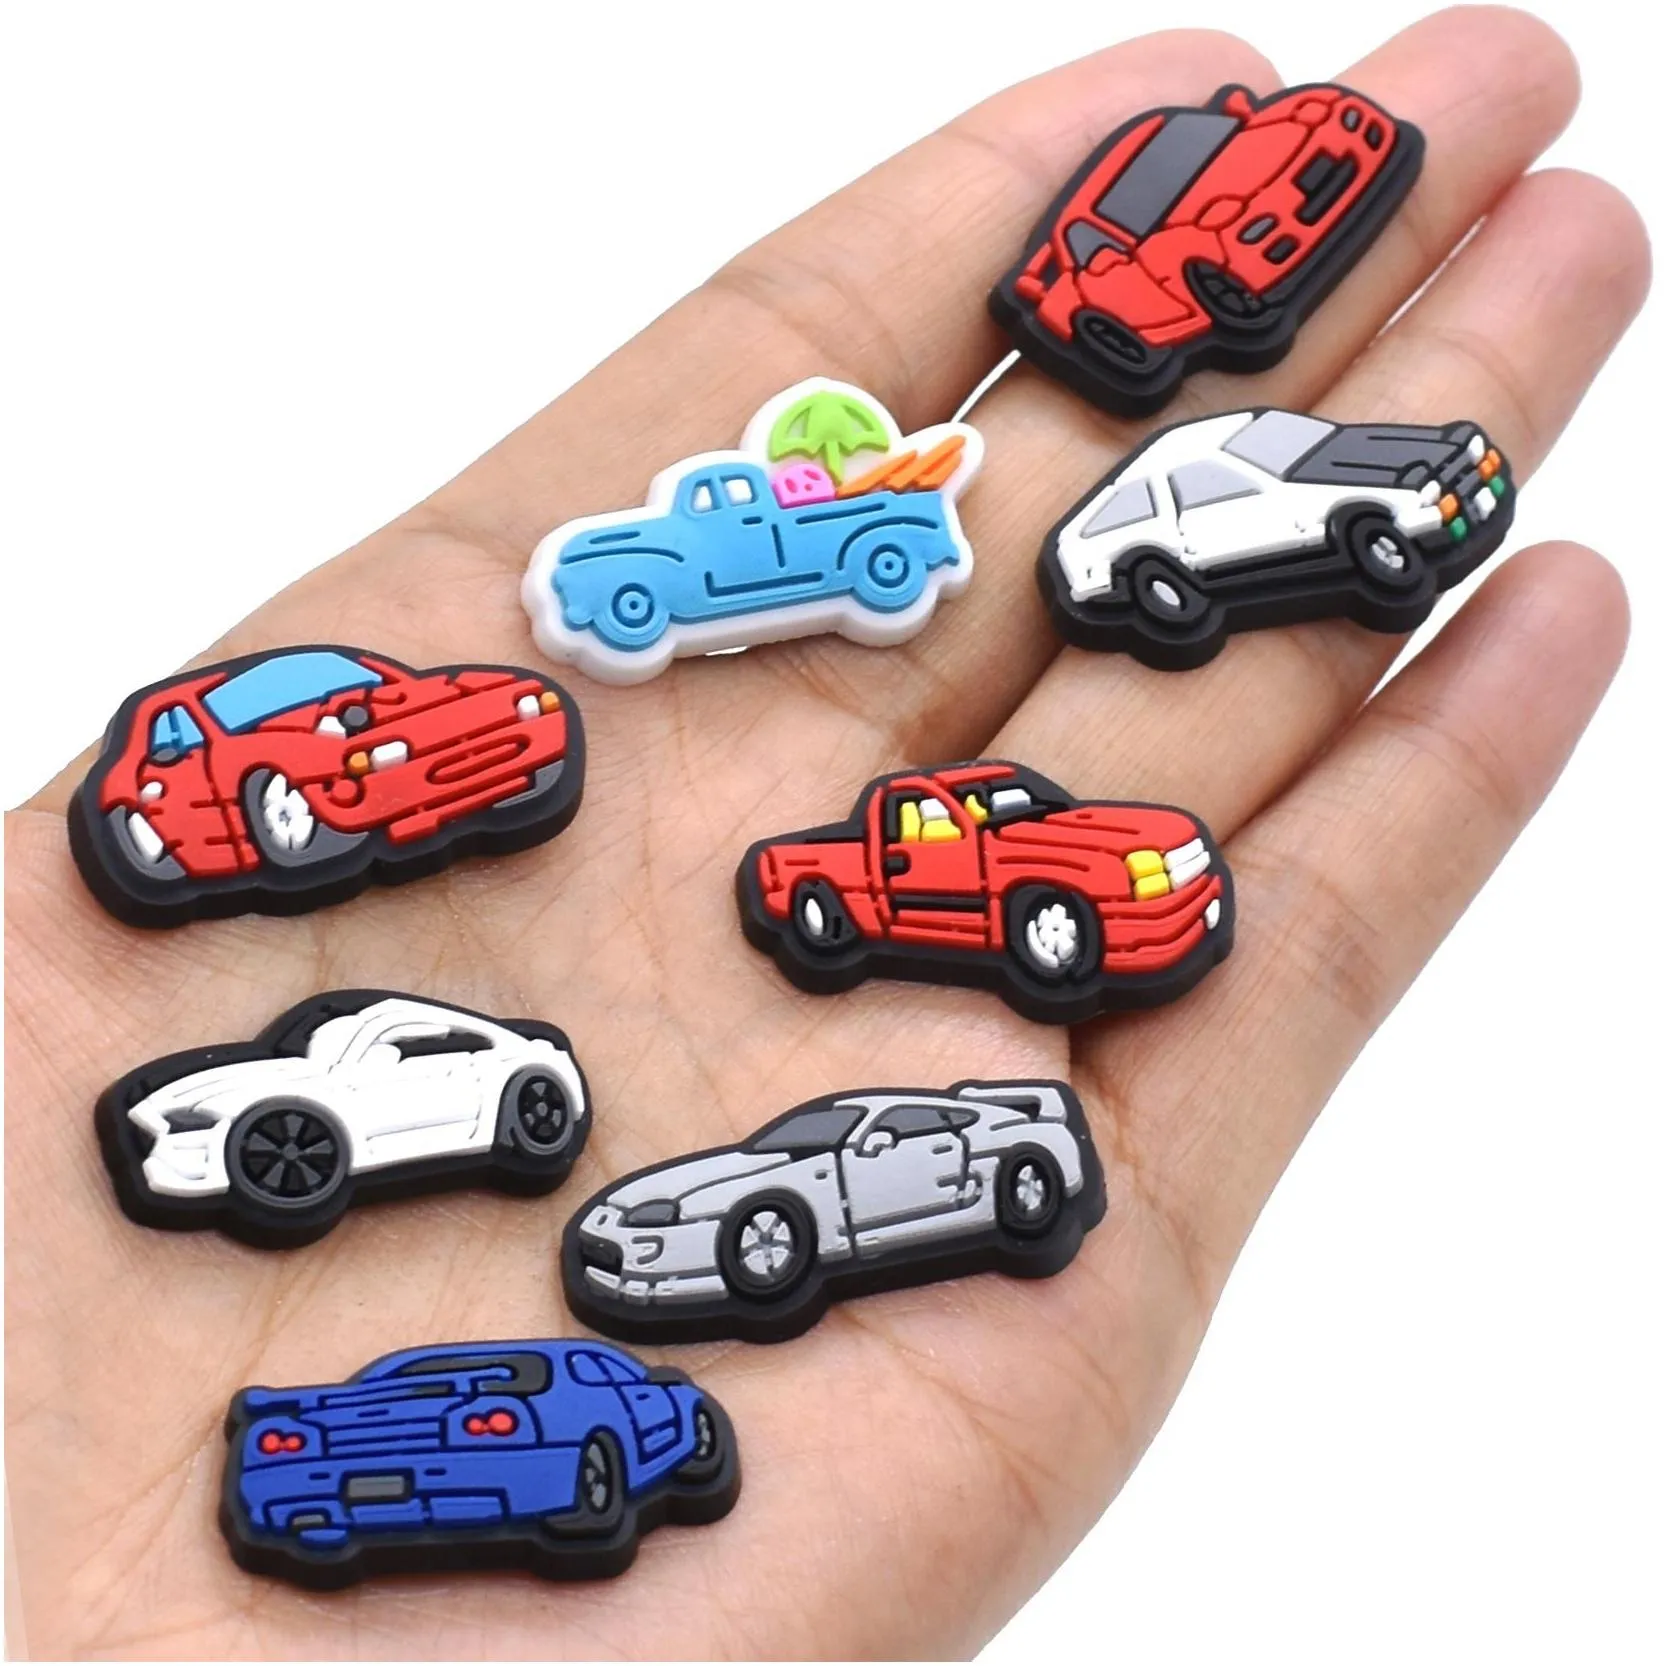  cute different car shoe charms saloon car racing van shoe decorations fit christmas gift for kids